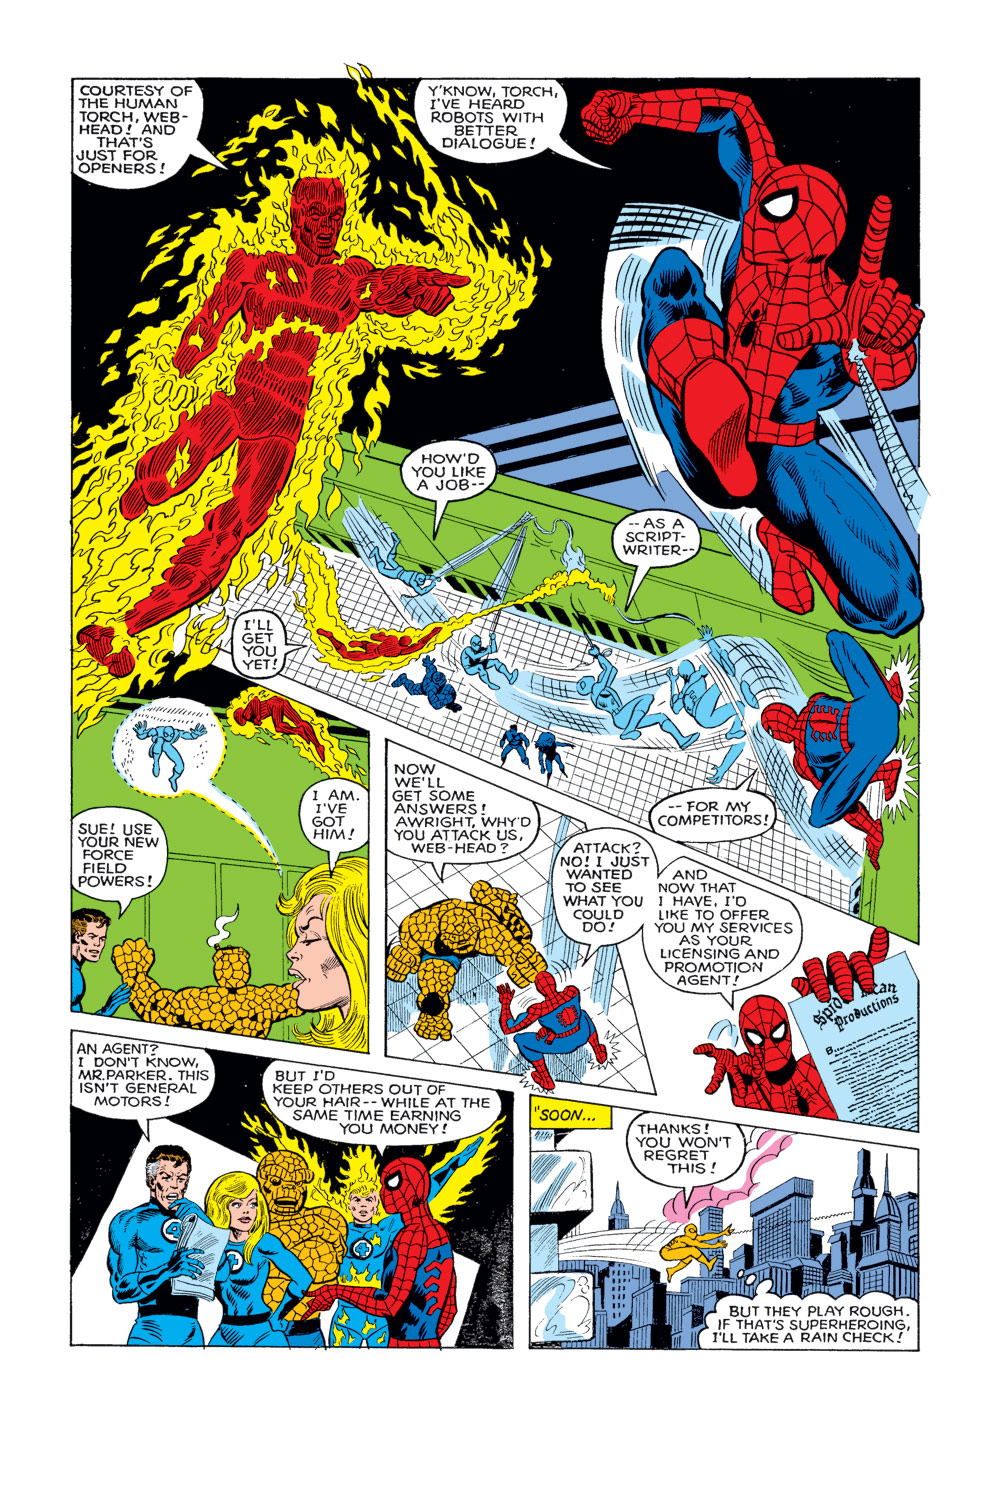 What If? (1977) issue 19 - Spider-Man had never become a crimefighter - Page 15